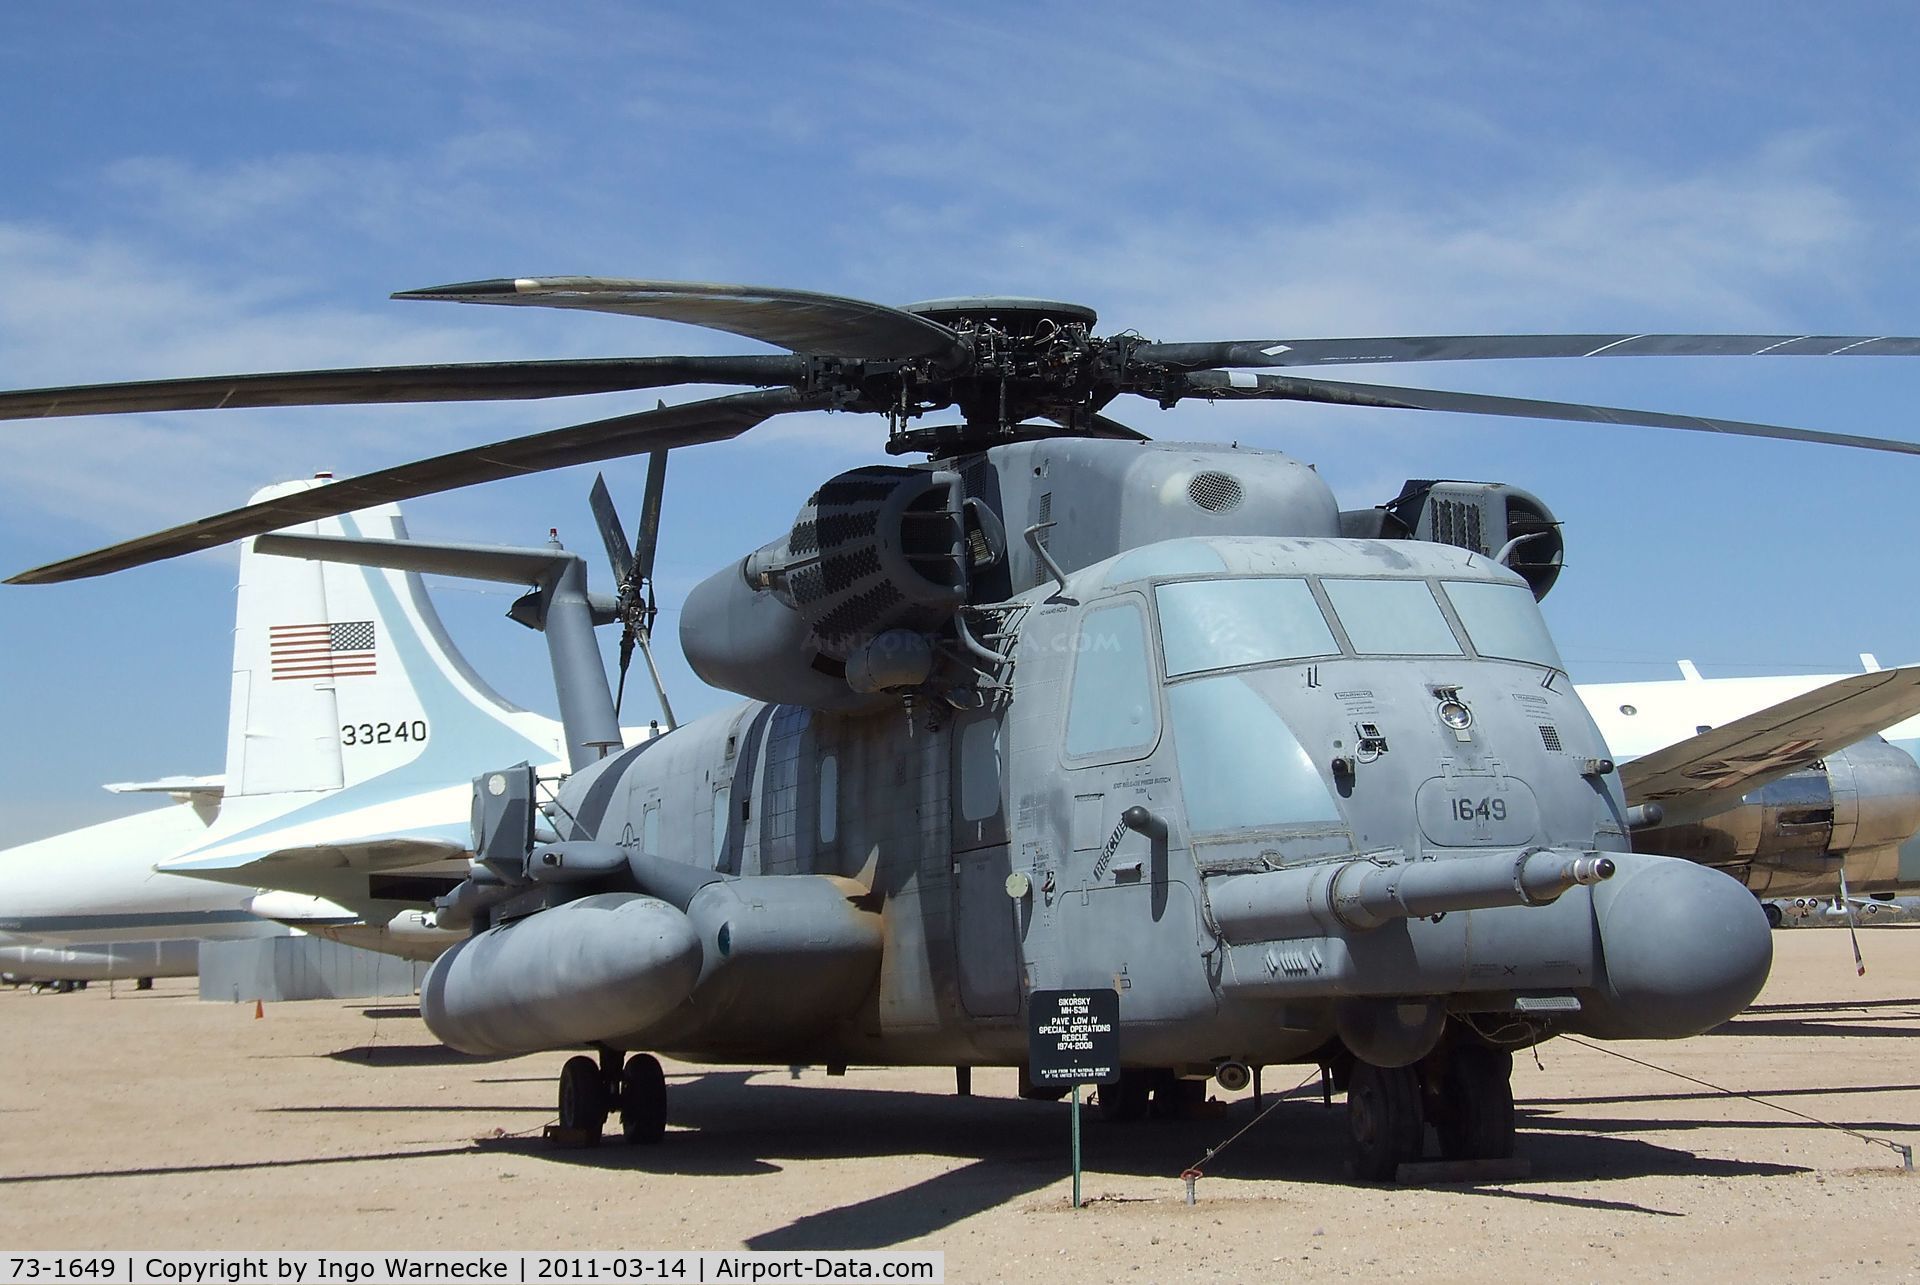 73-1649, Sikorsky MH-53J Pave Low III C/N 65-387, Sikorsky MH-53J at the Pima Air & Space Museum, Tucson AZ